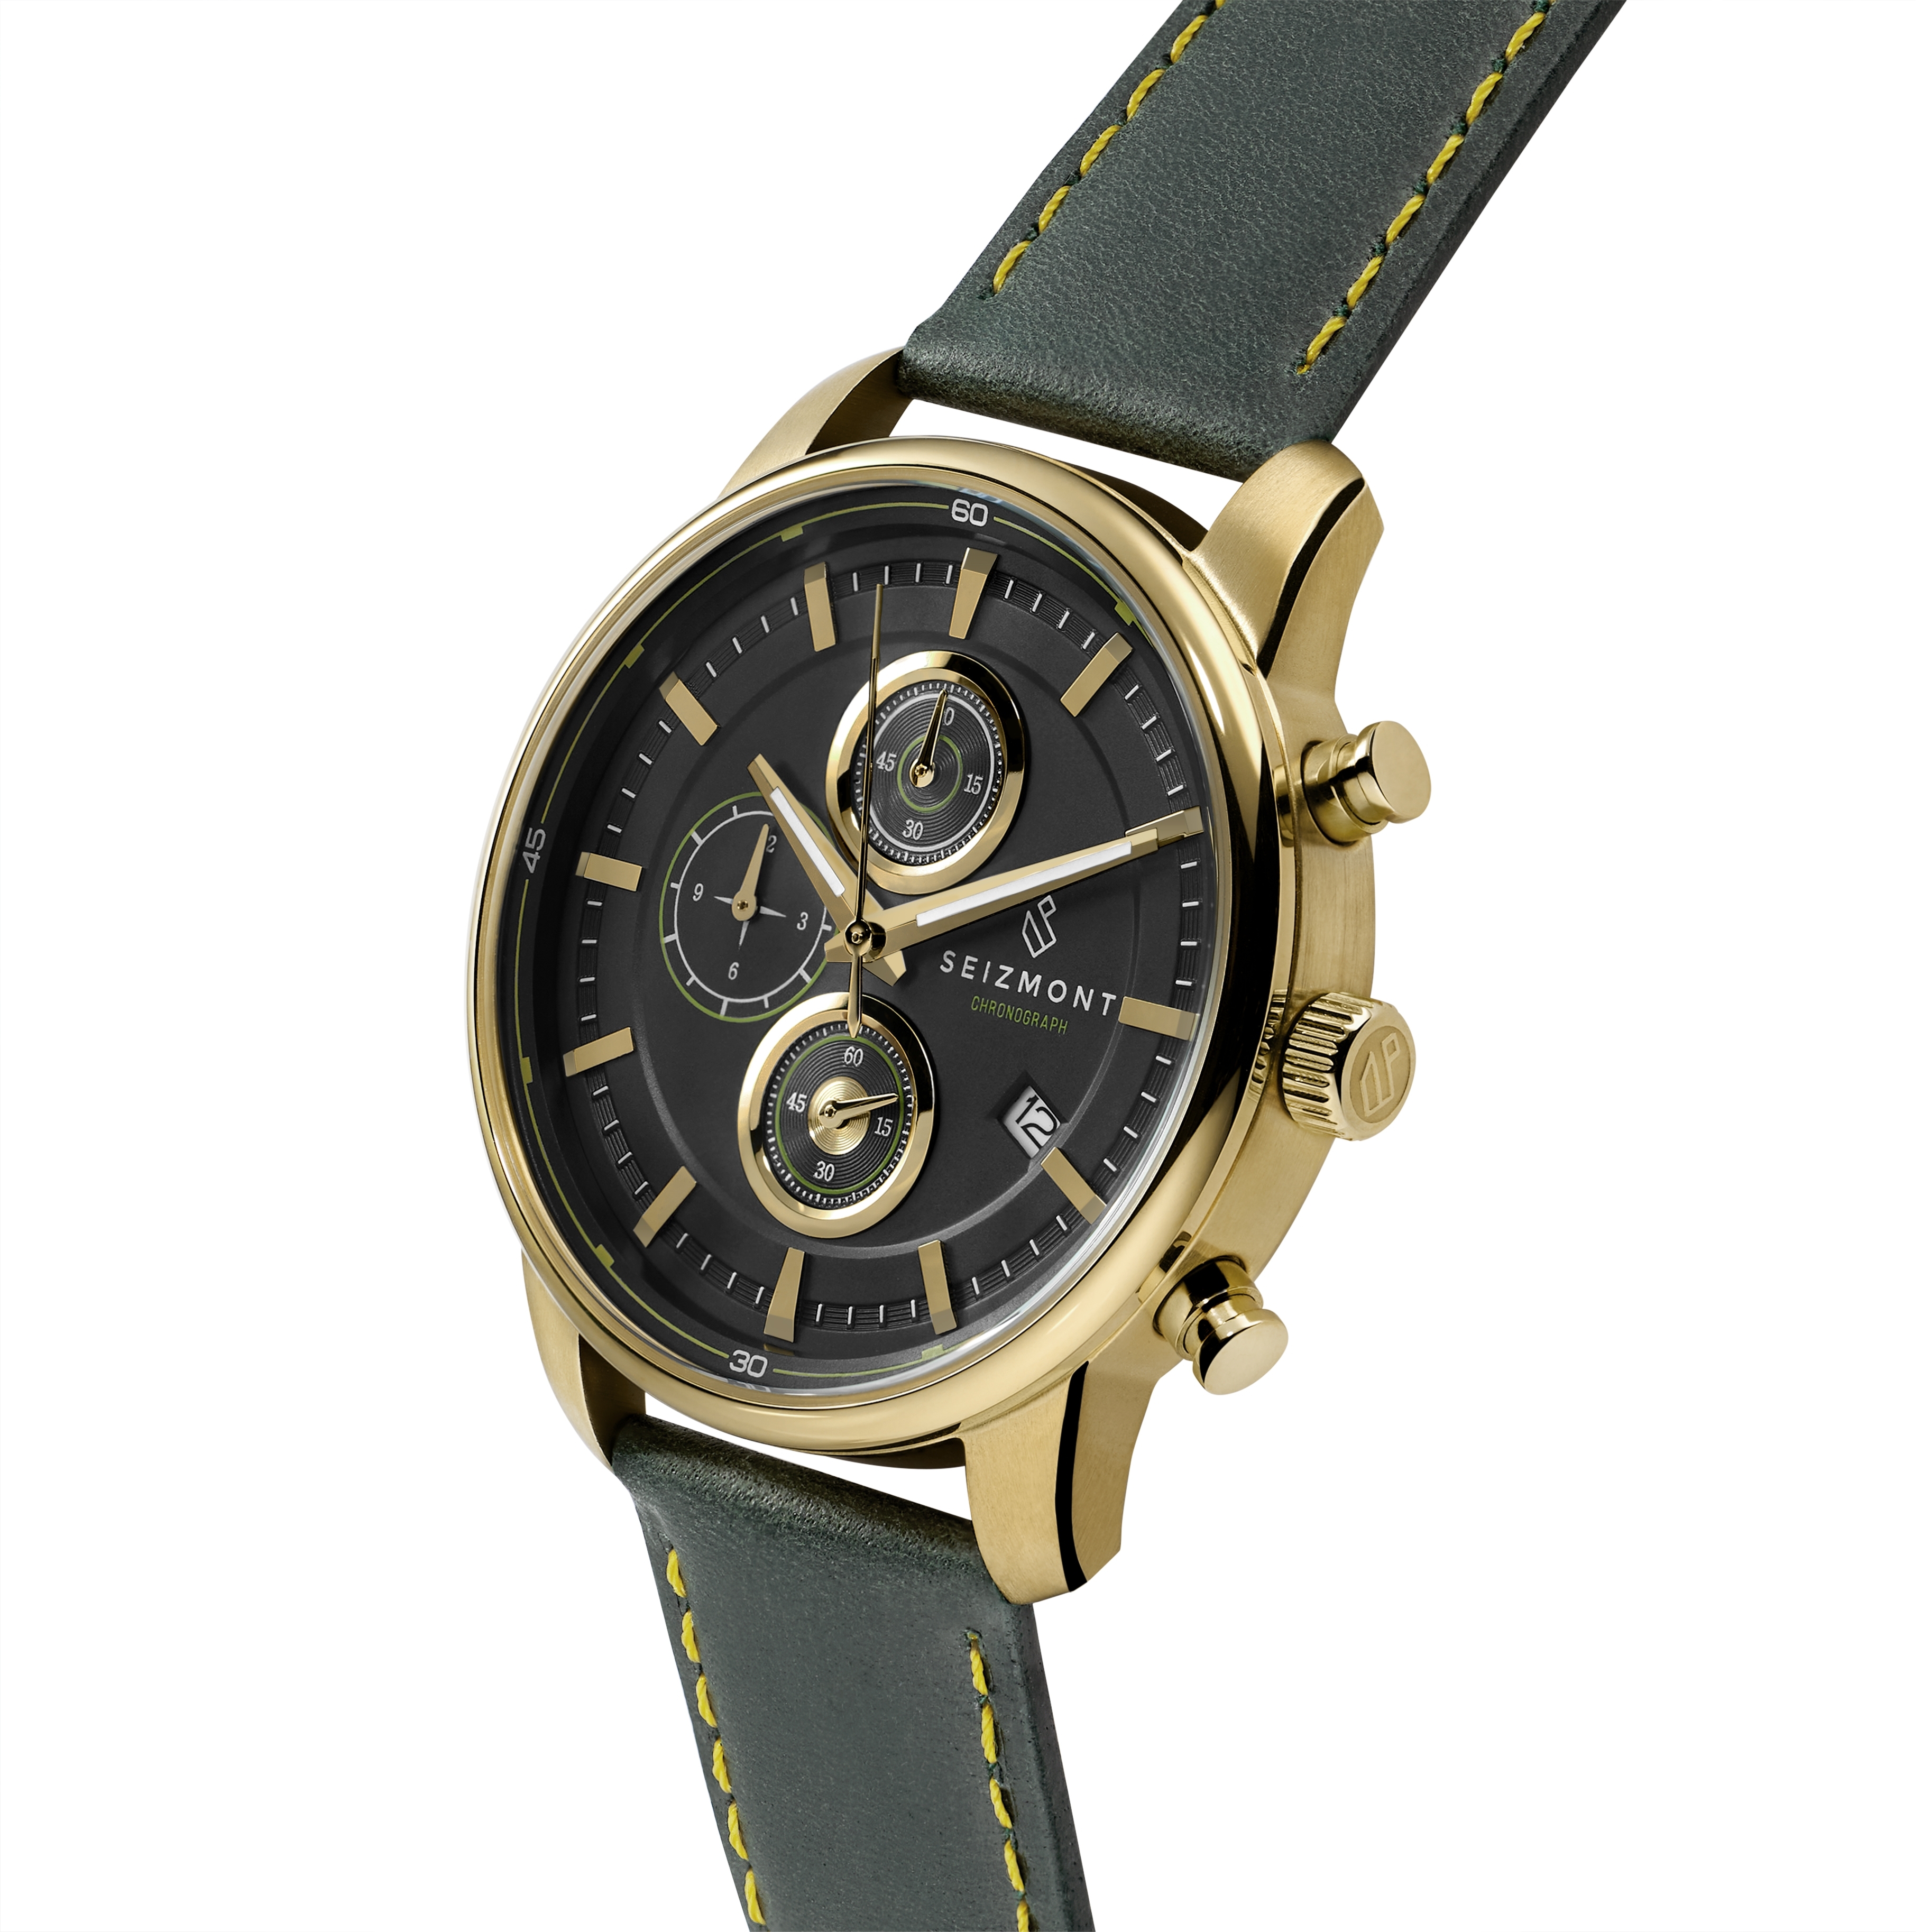 Parva | Gold-Tone Chronograph Watch | Strap | Green In Leather With Black stock! Dial Seizmont 